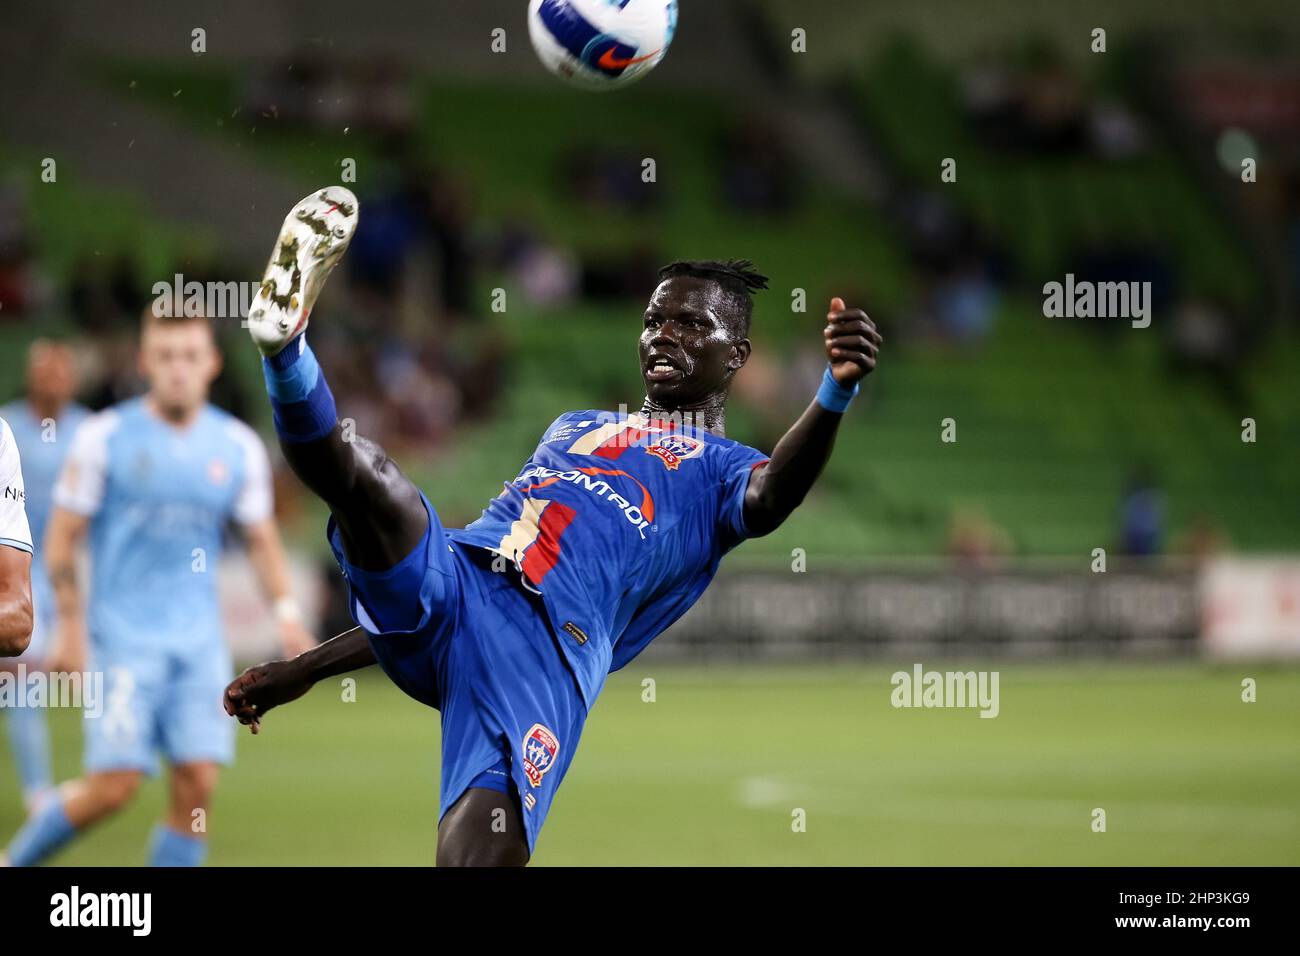 Melbourne, Australia, 18 February, 2022. Valentino Yuel of Newcastle Jets kicks the ball during the A-League soccer match between Melbourne City FC and Newcastle Jets at AAMI Park on February 18, 2022 in Melbourne, Australia. Credit: Dave Hewison/Speed Media/Alamy Live News Stock Photo